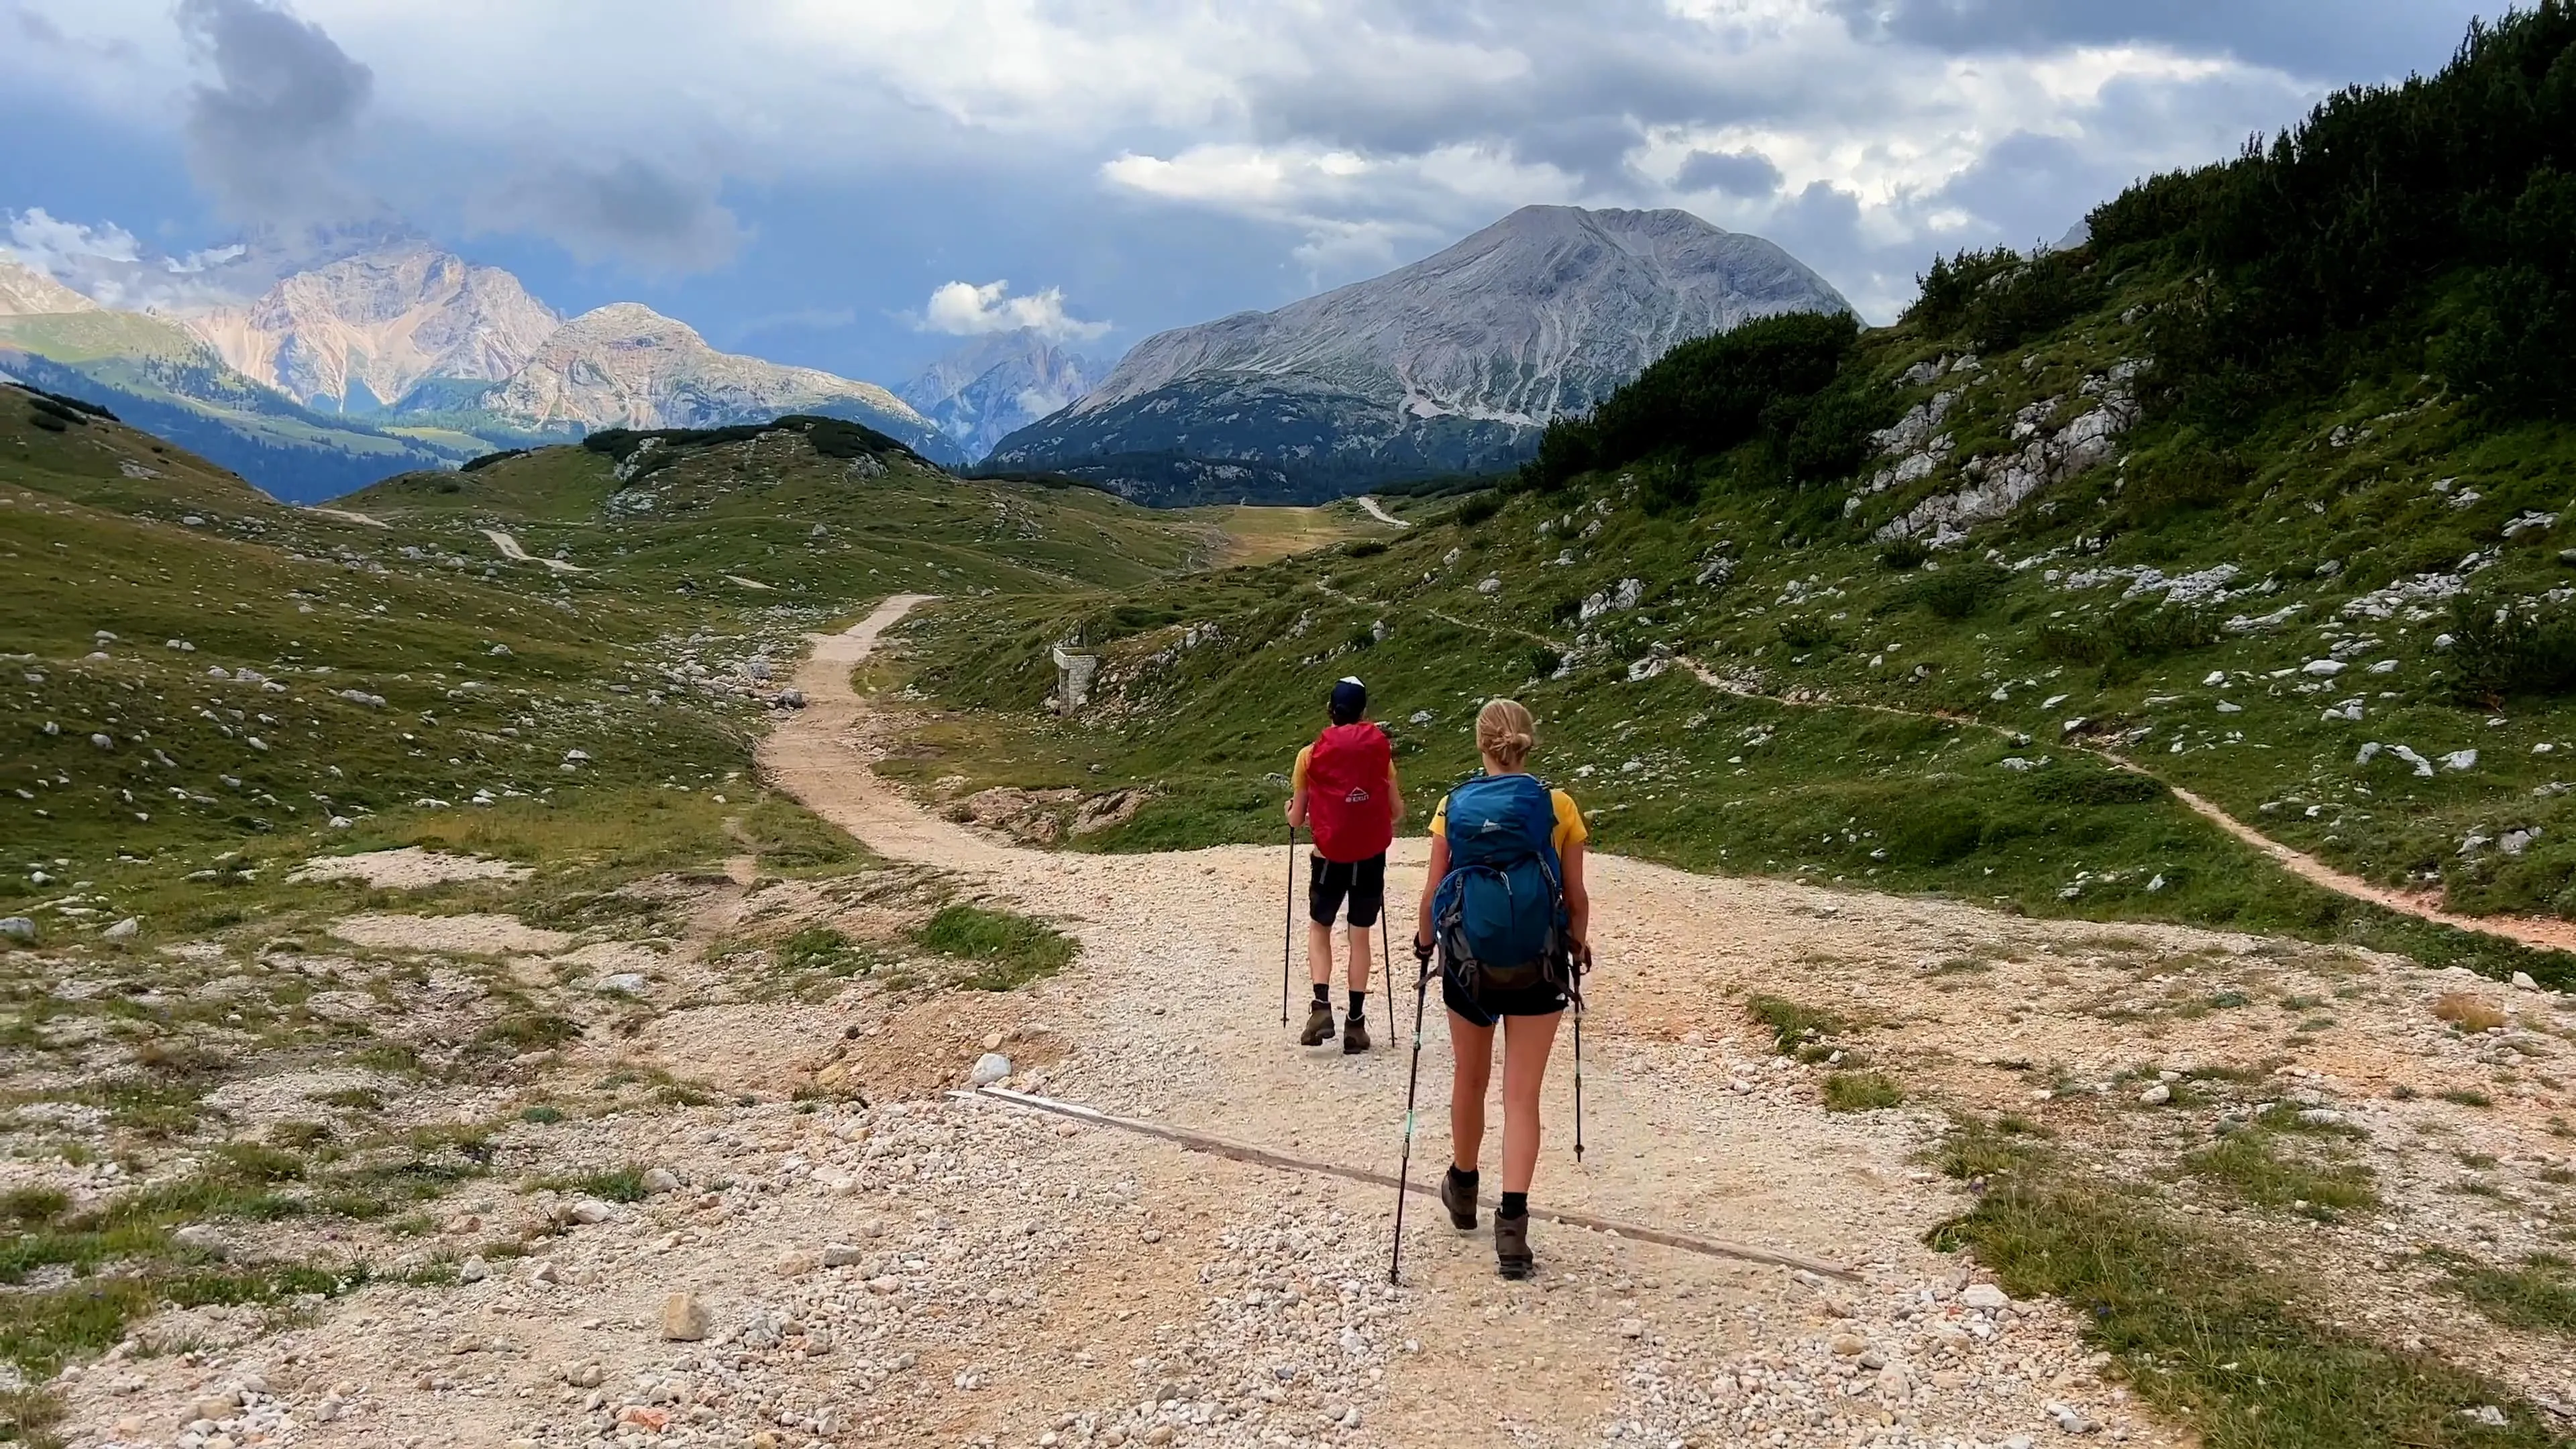 Alta Via 1, Italy: Guided or Self-Guided?